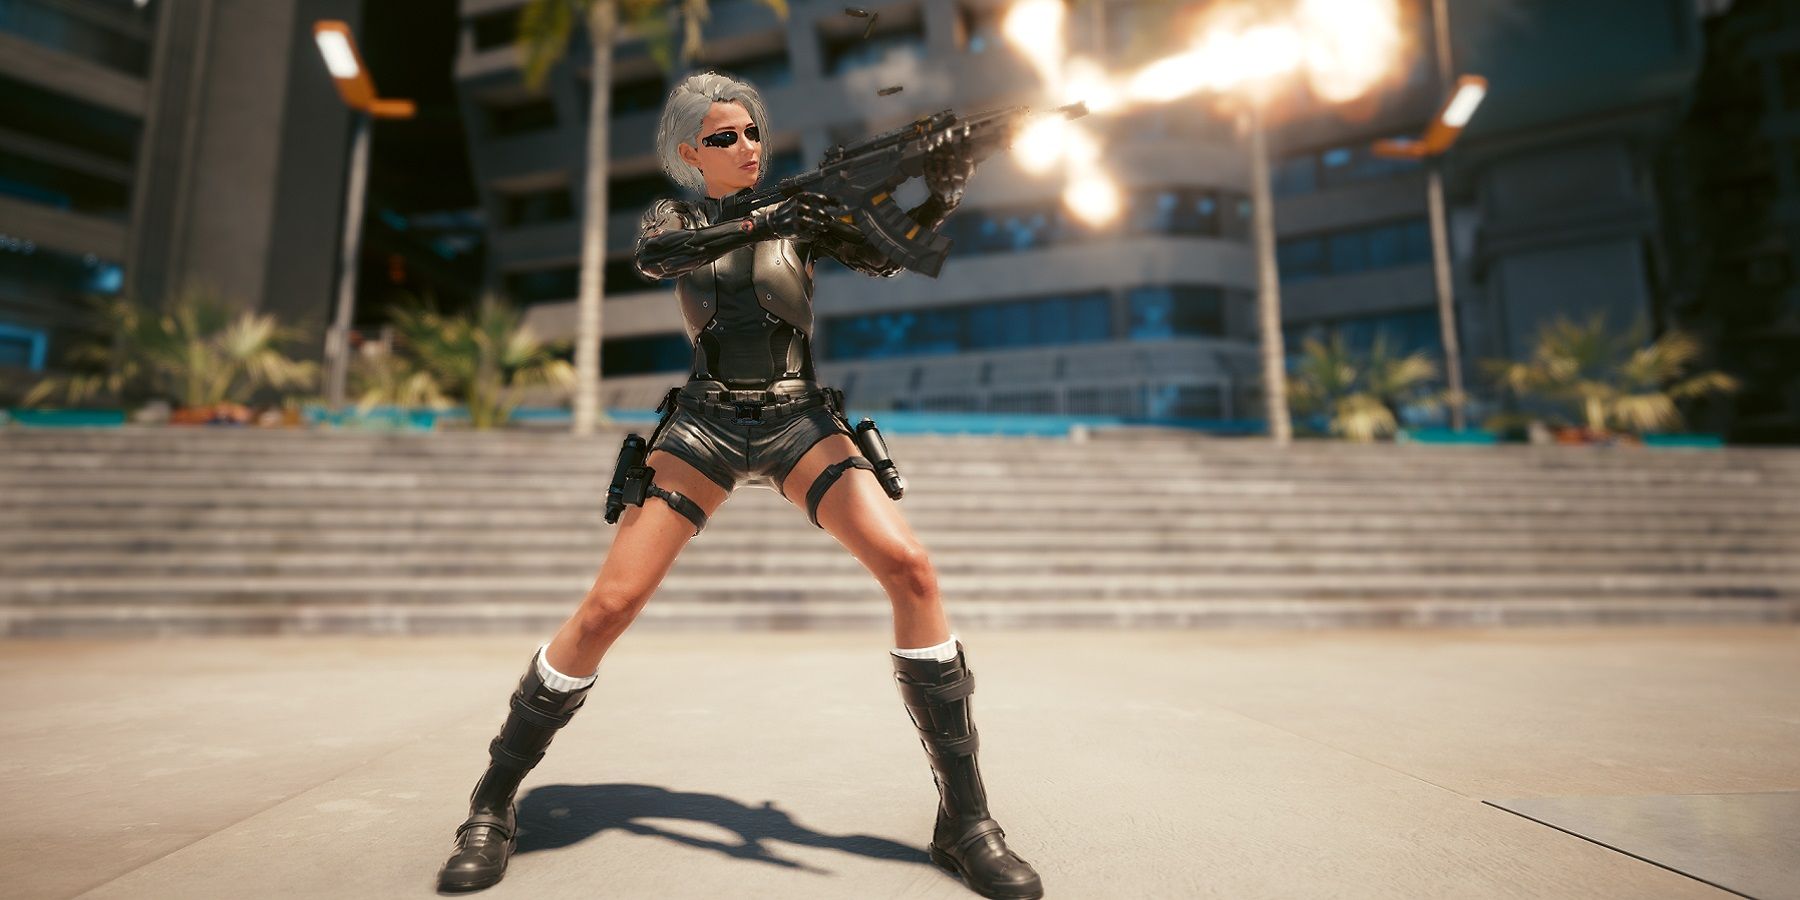 Image from Cyberpunk 2077 showing a female character in Deus Ex-style black outfit firing a gun.